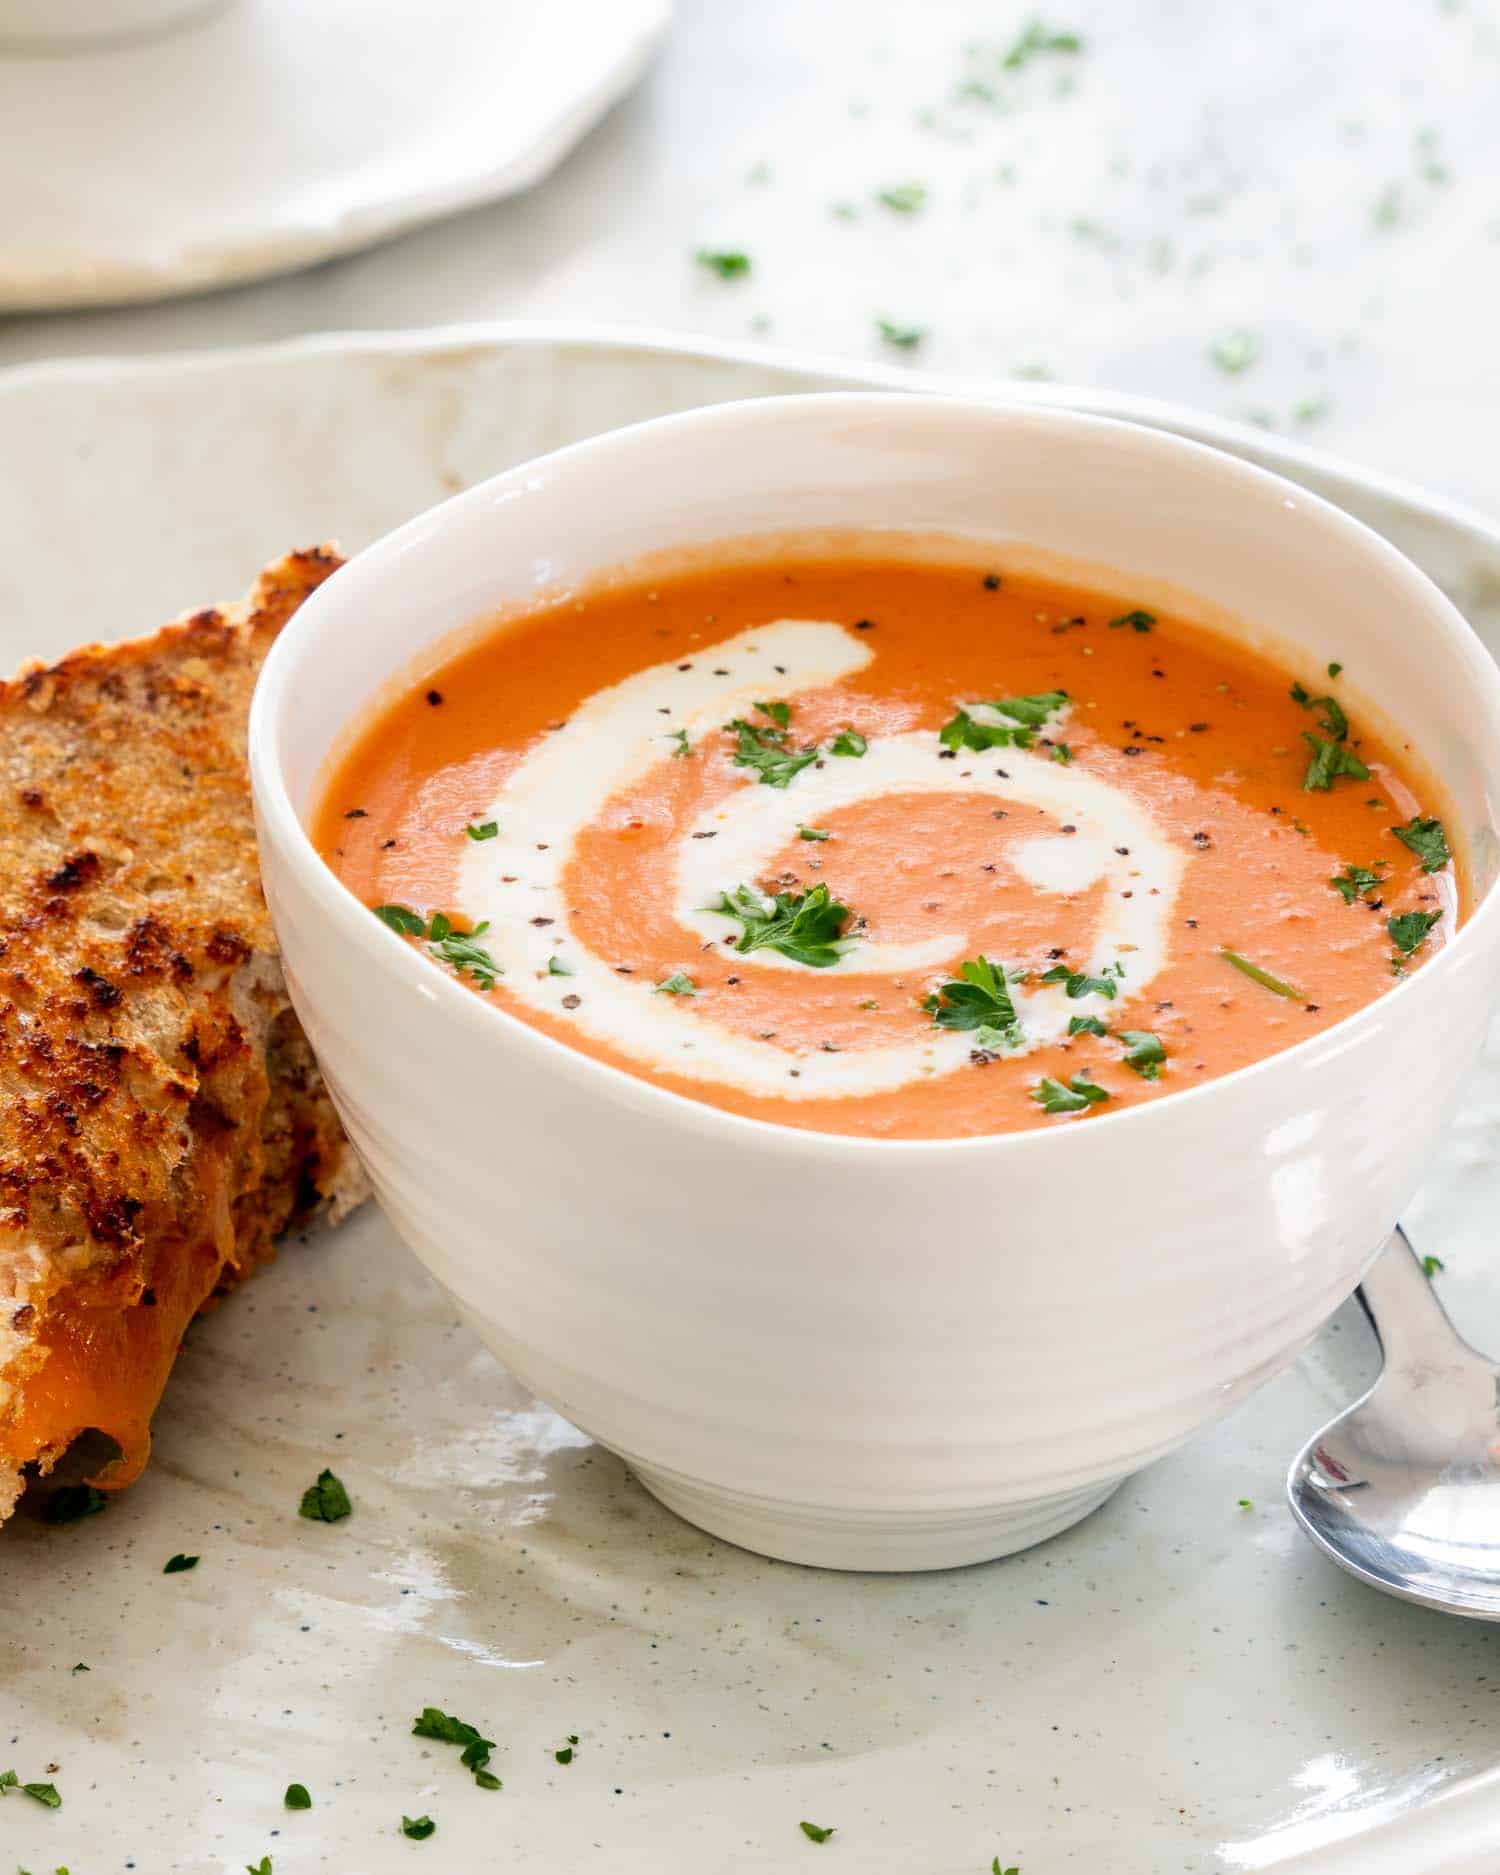 Homemade Tomato Soup - Made in 30 Minutes! - Life Made Simple